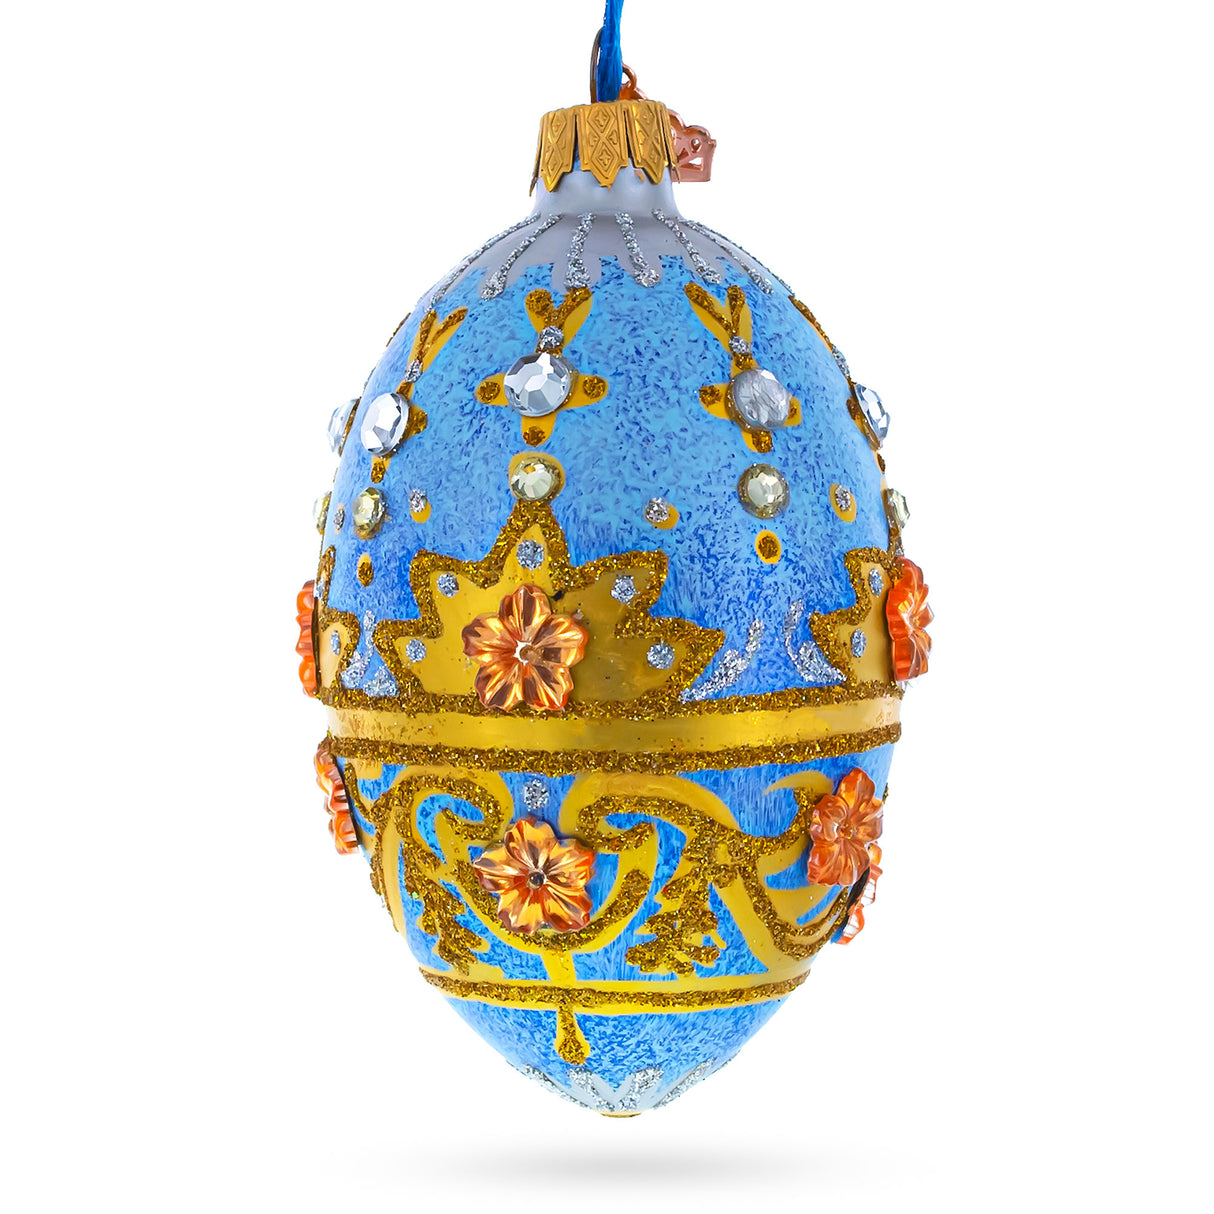 Golden Flowers on Speckled Blue Glass Egg Christmas Ornament 4 Inches in Blue color, Oval shape